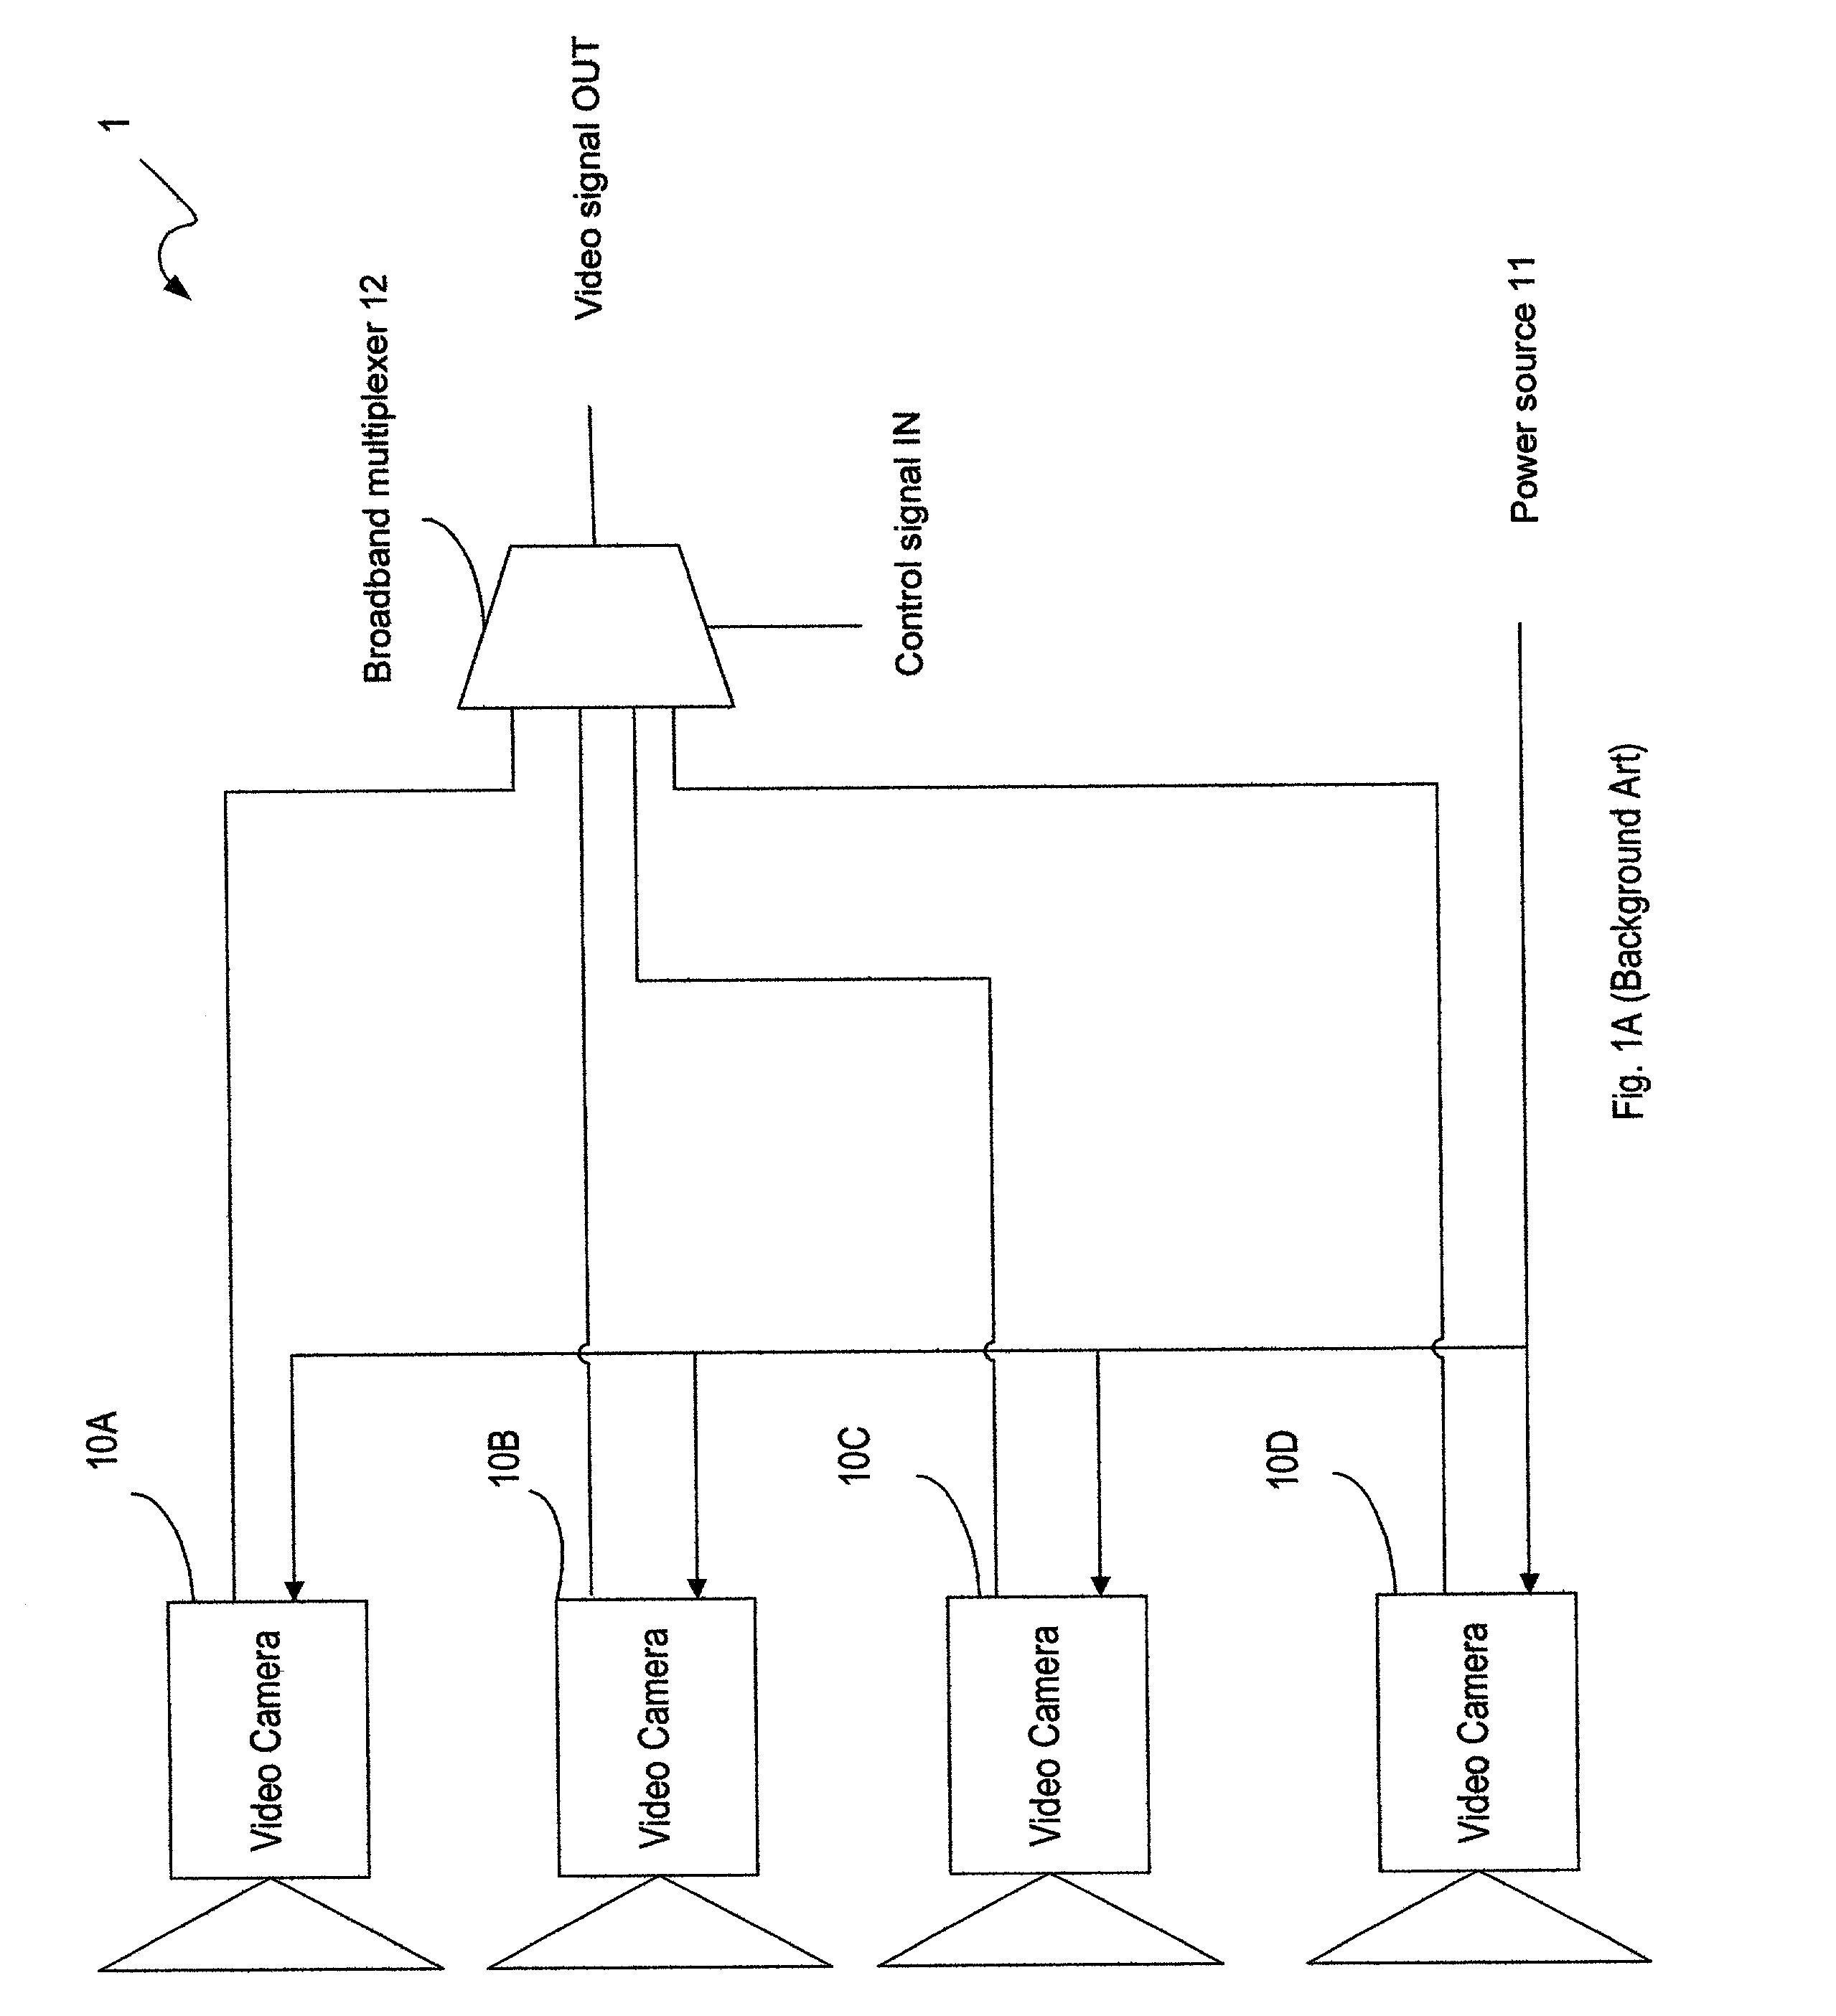 System, devices, and methods for switching between video cameras